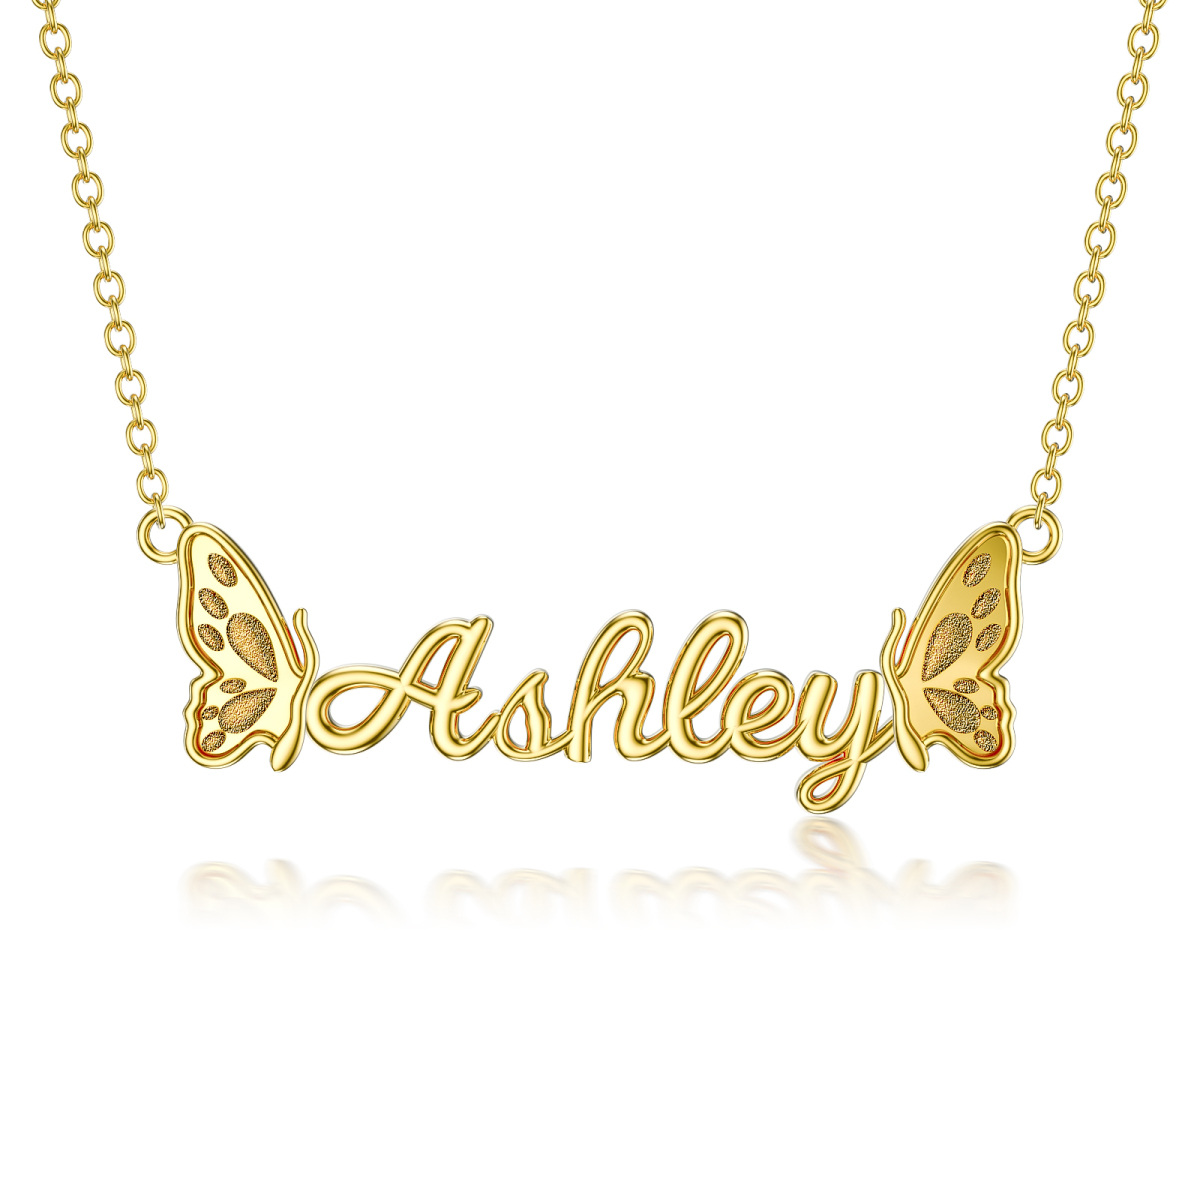 10K Gold Circular Shaped Crystal Personalized Birthstone & Personalized Classic Name Pendant Necklace-1